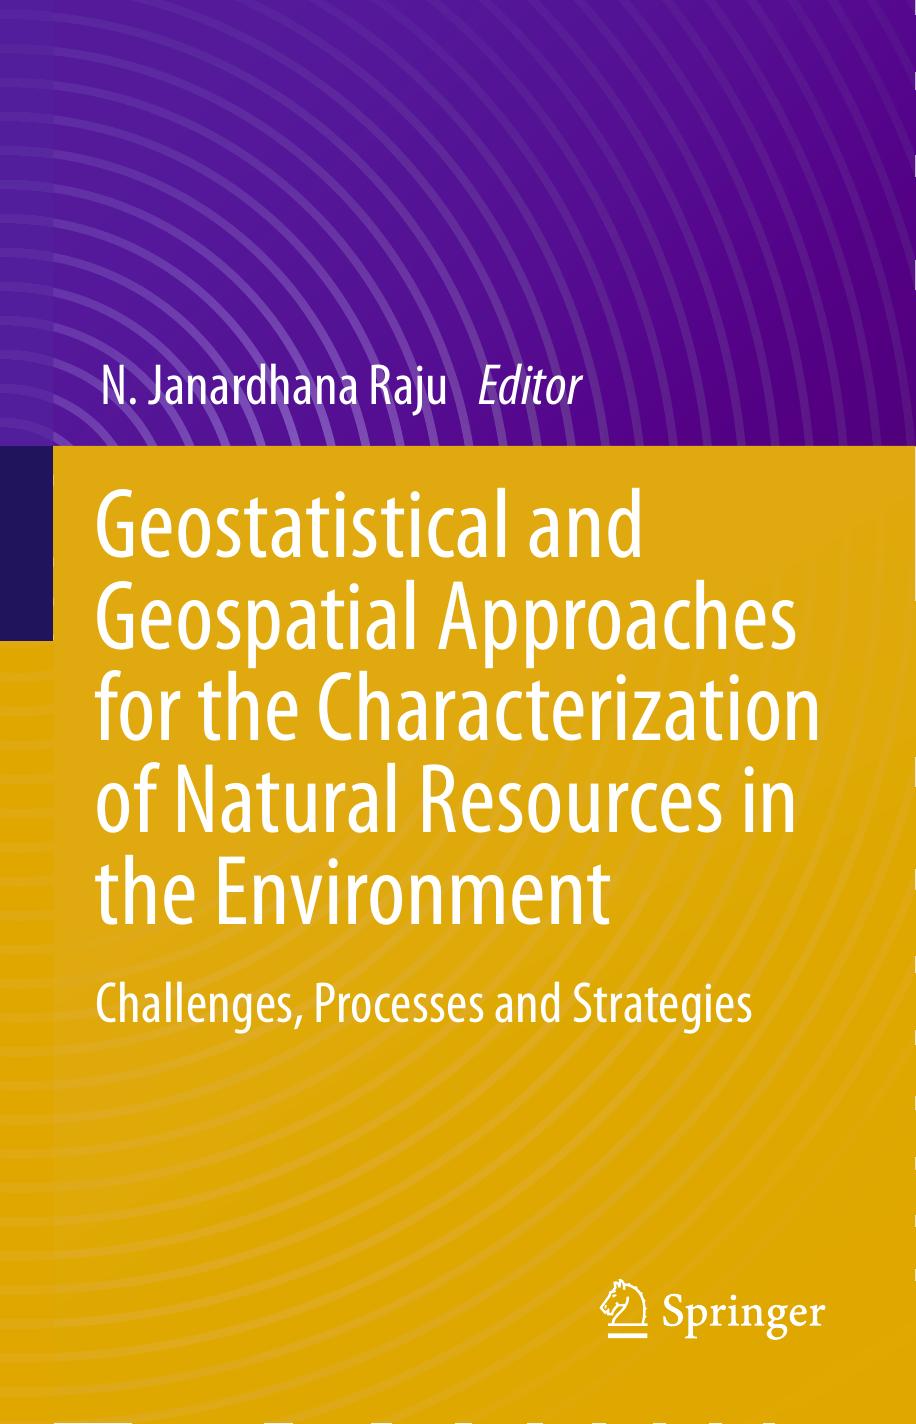 Geostatistical and Geospatial Approaches for the Characterization of Natural Resources 2016